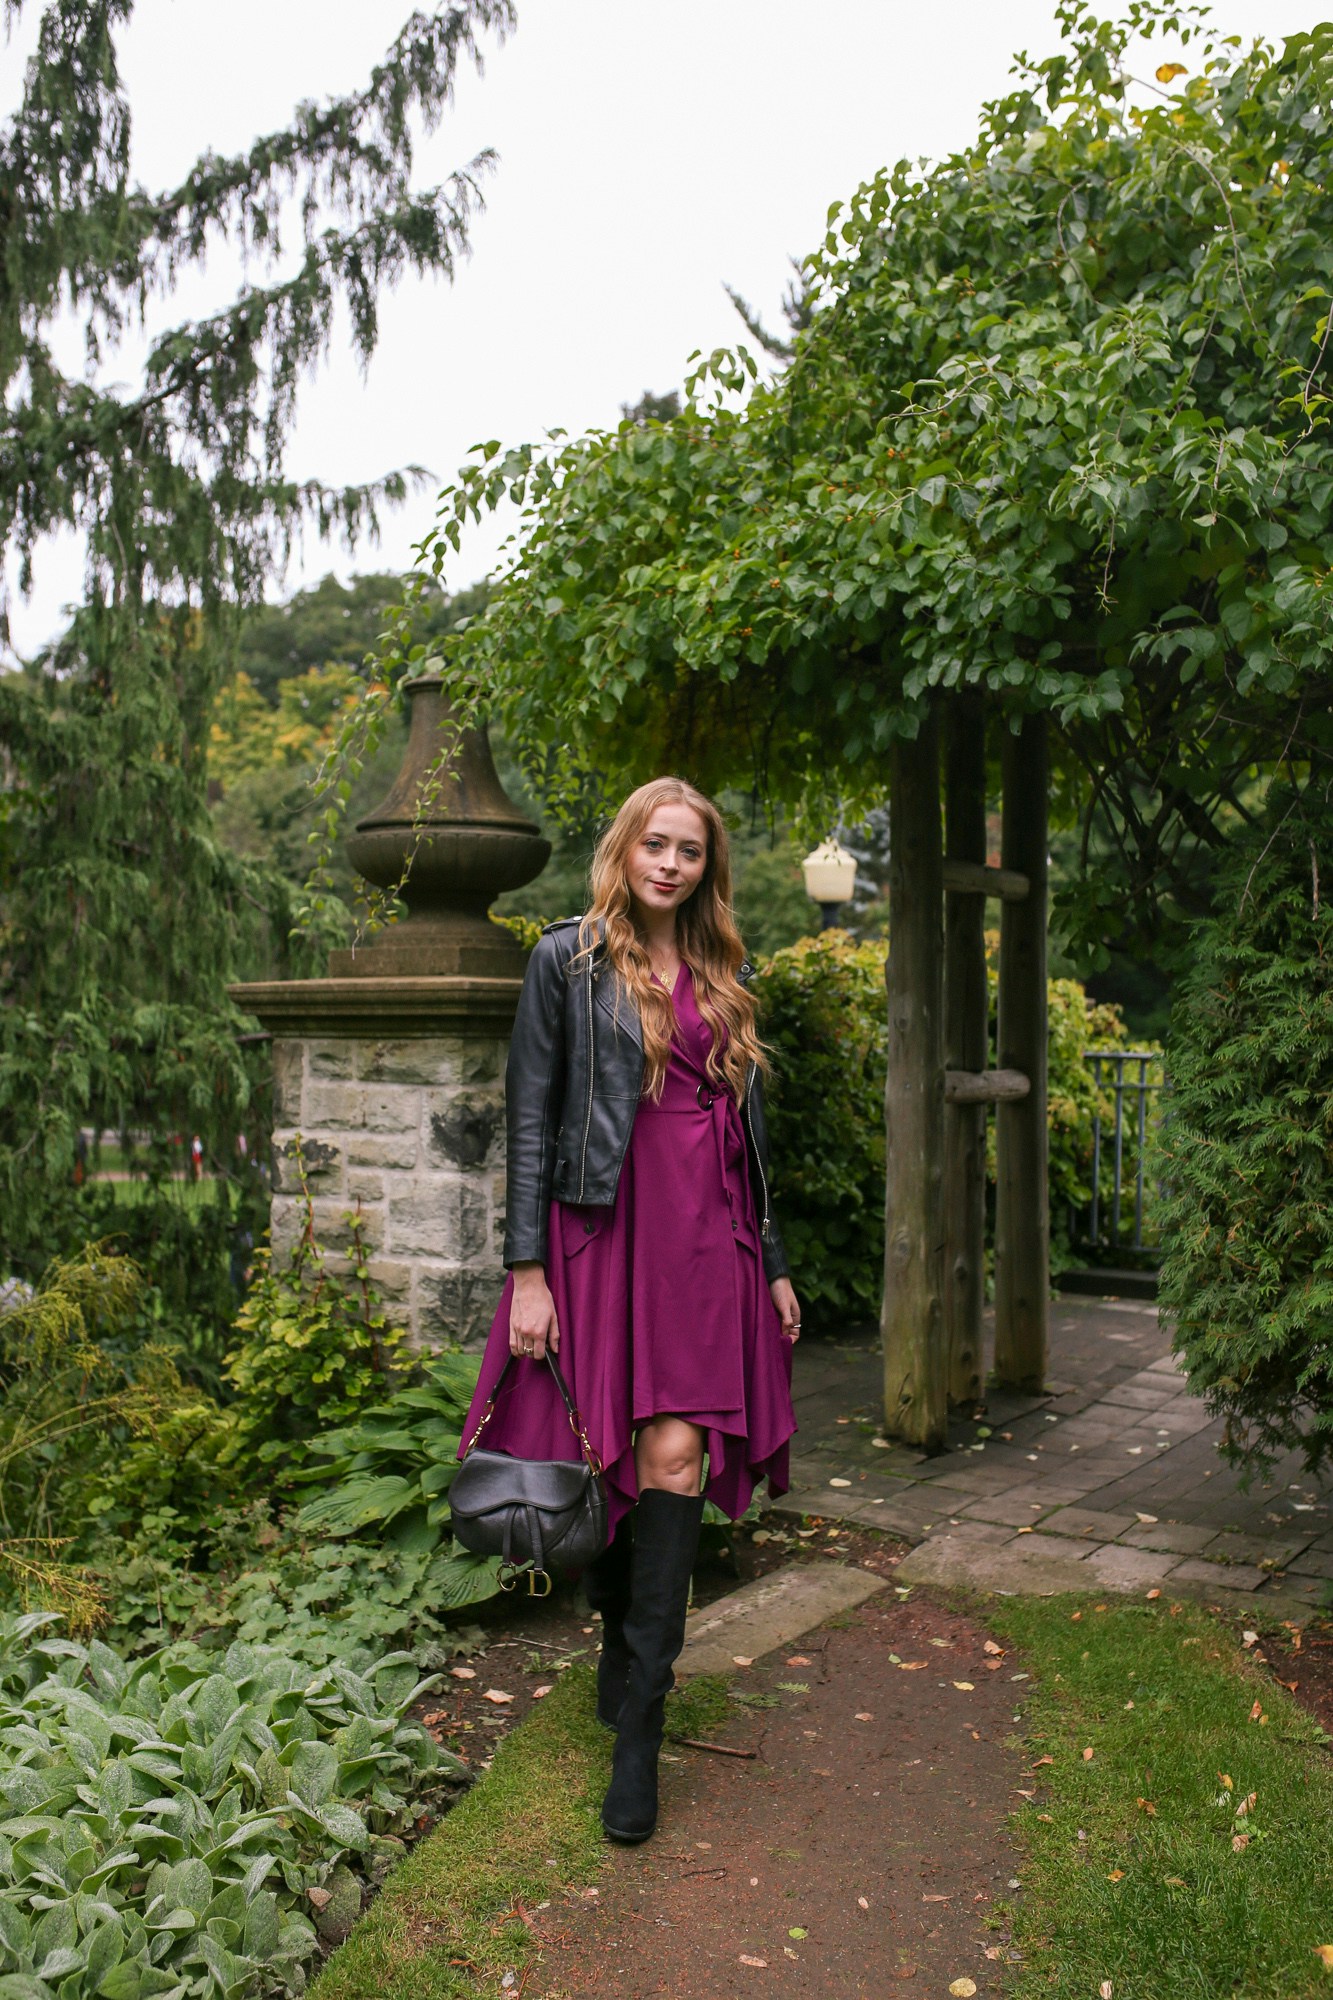 Leather Jacket and Chriselle Lim Wren Trench dress in berry purple